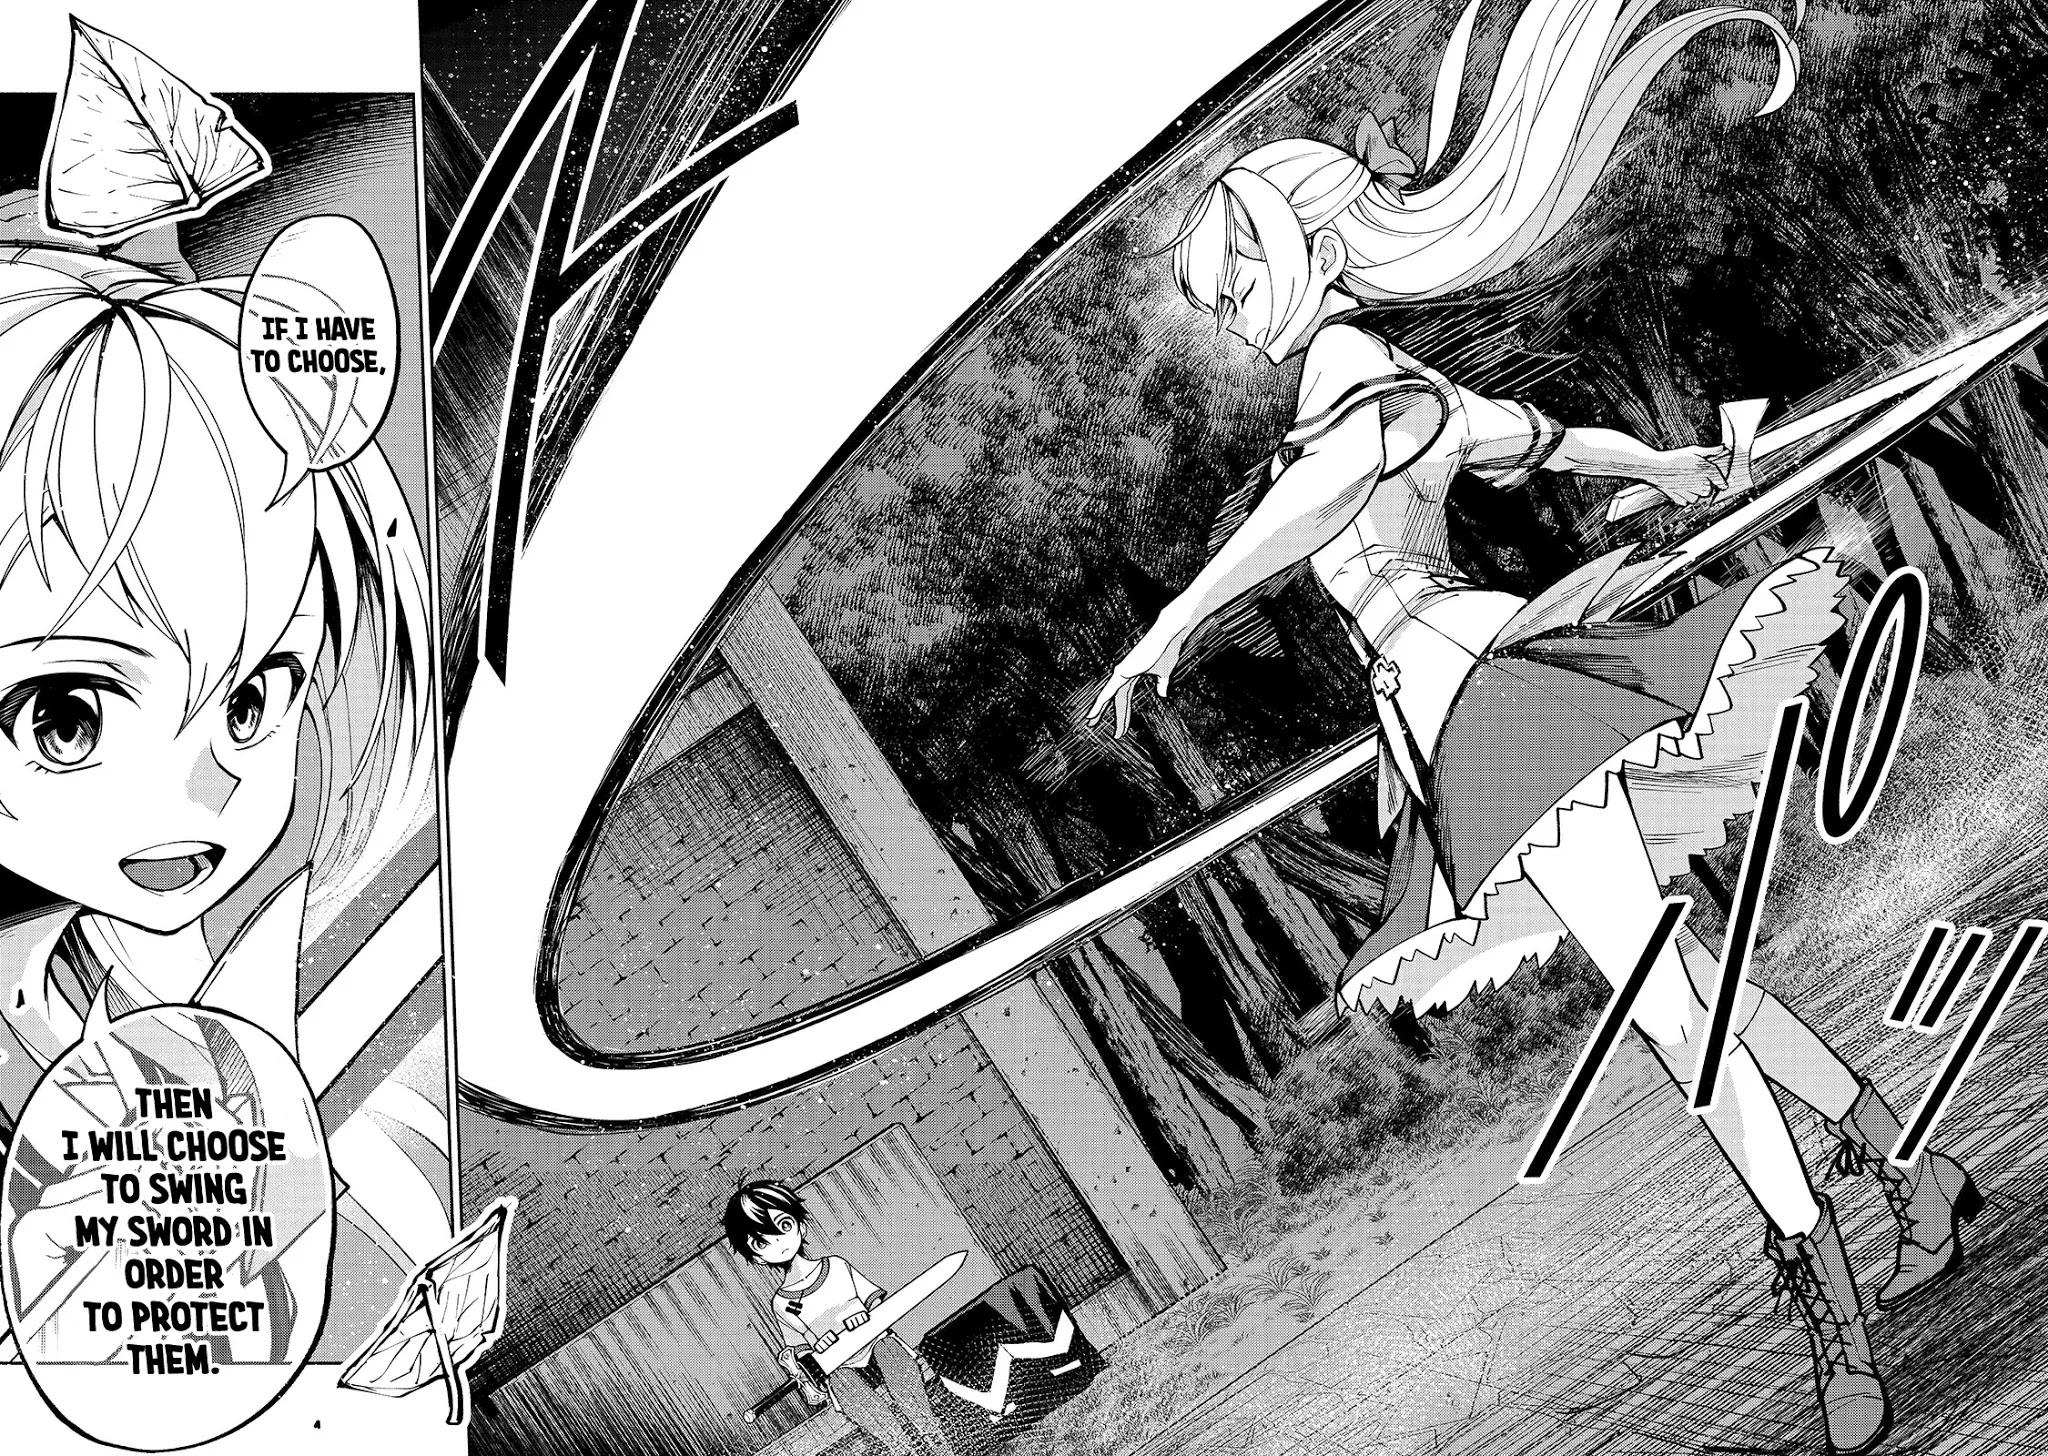 The Reincarnated 「Sword Saint」 Wants To Take It Easy - chapter 9 - #6